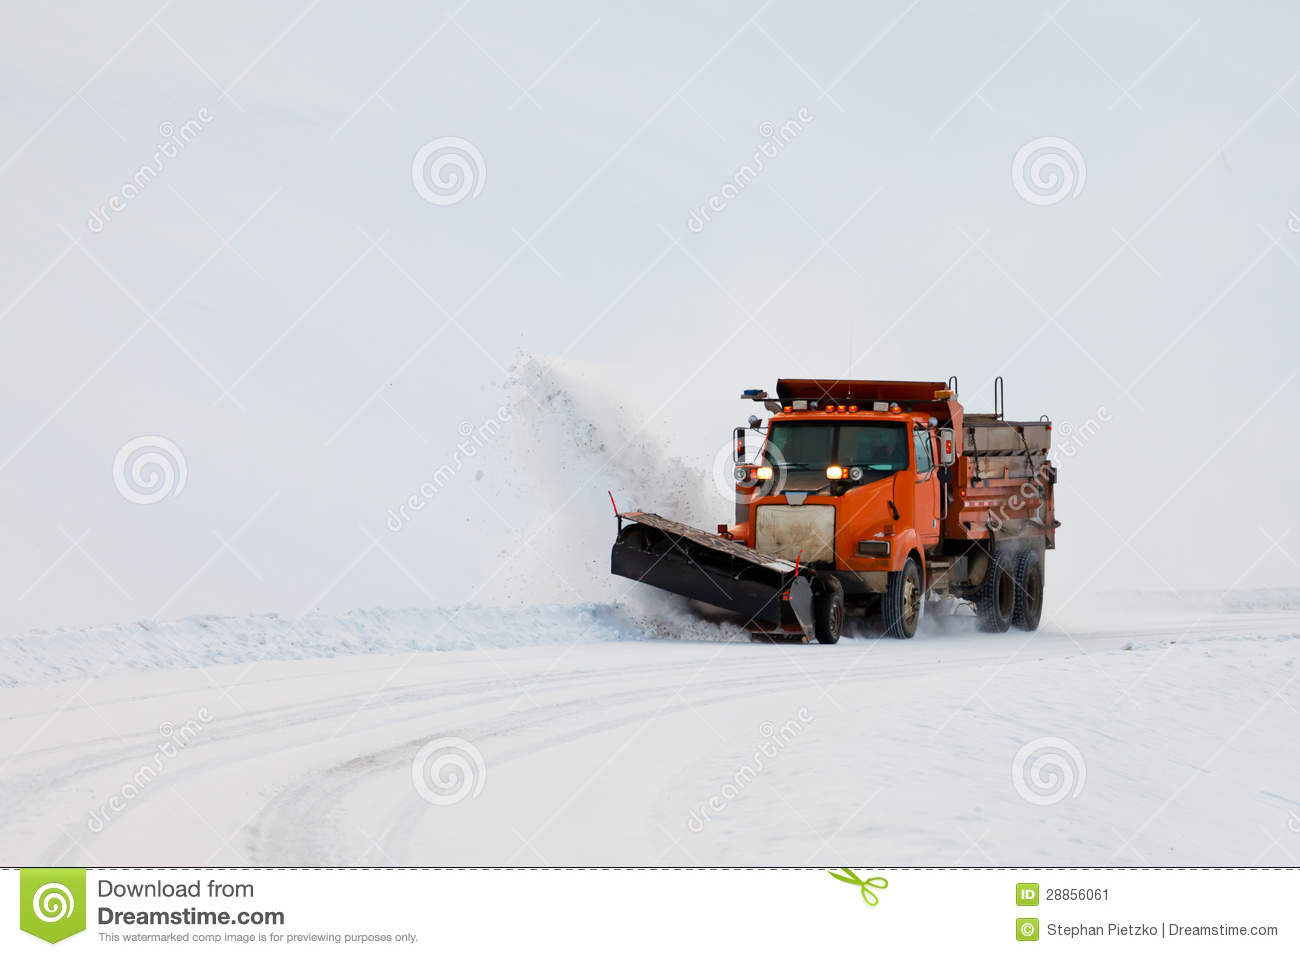 Snow Plough Clearing Road In Winter Storm Blizzard Stock Image   Image